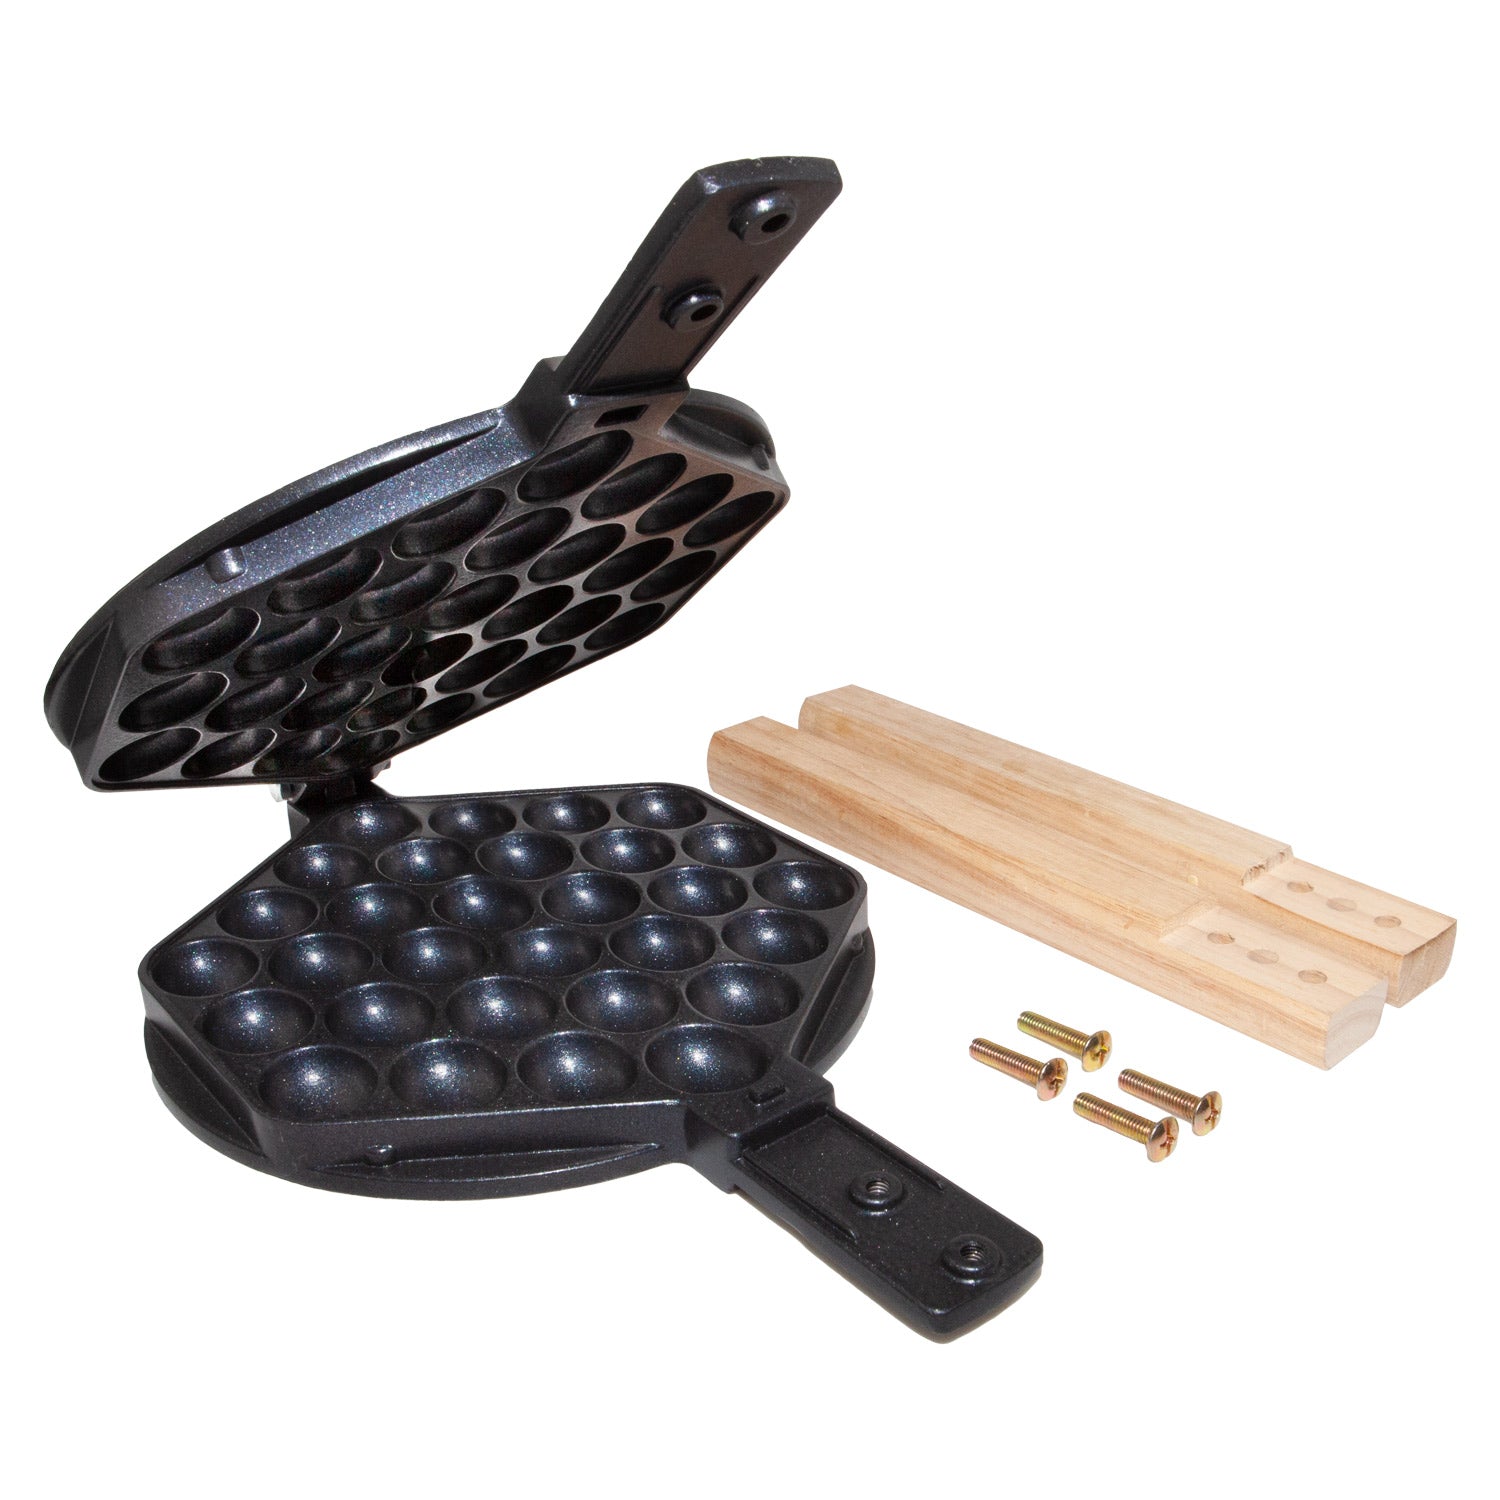 P_FY6-M Bubble Waffle Maker | Egg Waffle Maker Mold | Replaceable 180 Degree Rotating Waffe Iron | Nonstick